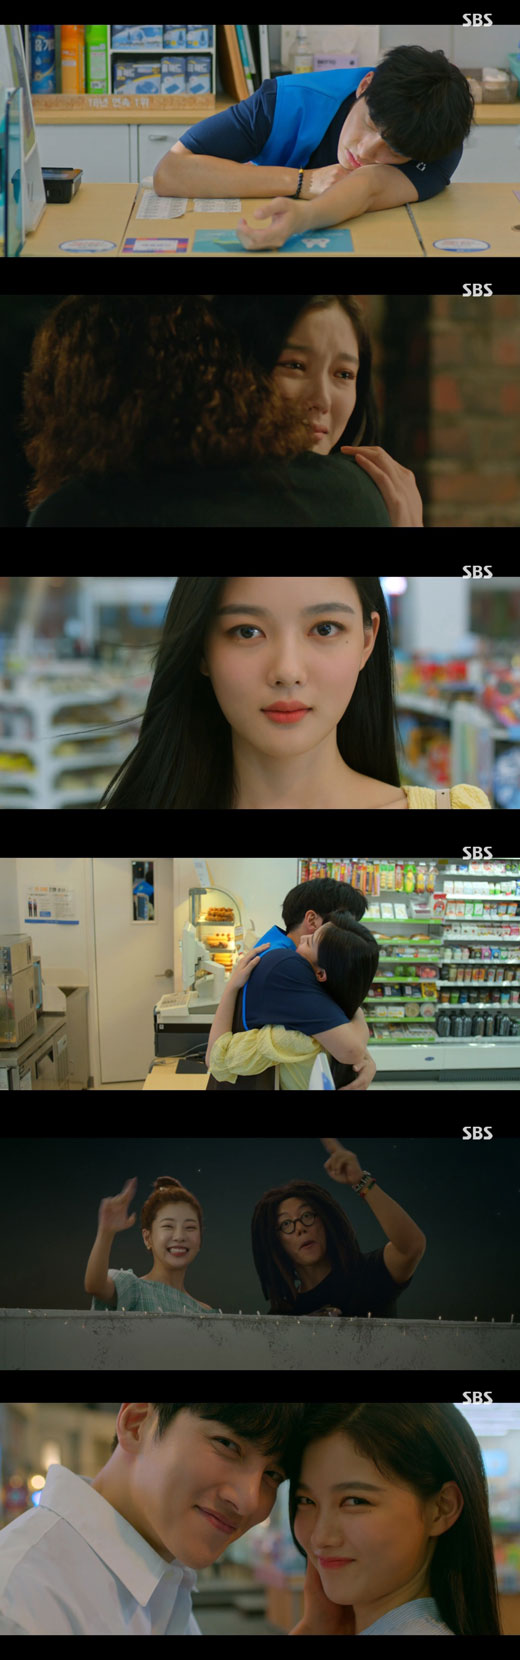 The love line of Actor Ji Chang-wook and Kim Yoo-jung has finally been concluded.It was a plain ending that ended with a shy hug.The last episode of SBSs Convenience Store Morning Star (directed by Son Geun-joo, Lee Myung-woo) was broadcast on the night of the 8th.On the show, Choi Dae-heon (Ji Chang-wook) spends a hard time missing Kim Yoo-jung, who left home with only one note.Then, Han Dal-sik (Mun Moon-seok) finds a star working at a flower farm in his hometown, and calls Choi Dae-heon straight away.Choi Dae-heon, who visited the star, remembers the first meeting of the two 10 years ago and says, I will wait until you come. However, the star hesitated to return to him as he decided to leave to prevent Choi Dae-heon from moving forward.However, when Choi Dae-heon resigned as an advisory councilor and started his Convenience store managerial job again, he went to the Convenience store and said, I came to see that Alba interview.Choi Dae-heon confessed, Where did you come now? I did not want to see how much I wanted to see.At the same time, Choi Dae-heon said, Thank you so much for coming back, morning star, stay with me, not you going anywhere forward, and the two embraced together.In addition, the star said to Ji Chang-wook, I like what you asked last time. He decided to become a special person of Choi Dae-heon, confirming each others feelings and welcoming a happy ending.Convenience store morning star was surrounded by controversy before the first broadcast started.Not only was the original adult webtoon of the same name, but also the casting of Ji Chang-wook and Kim Yoo-jung, who are actually 12 years old, came out with a voice of concern among netizens.Even from the first broadcast, he was subject to court sanctions by the Korea Communications Commission (hereinafter referred to as the Korea Communications Commission) for sensational scenes such as kissing minors and adults, smoking and swearing by youth, officetels where prostitution takes place, and naked ambassadors of adult webtoon writers.However, as the time goes by, Convenience store morning star gradually calmed the controversy with the light love line of Choi Dae-heon, who keeps the life of the family and keeps the life of the family alone.In addition, viewers were well received with the lesson of good adults, good family is like this.It was a Convenience store morning star which was ridiculous and ridiculous, but it was a pure and good ending without a deep kiss between the main characters.